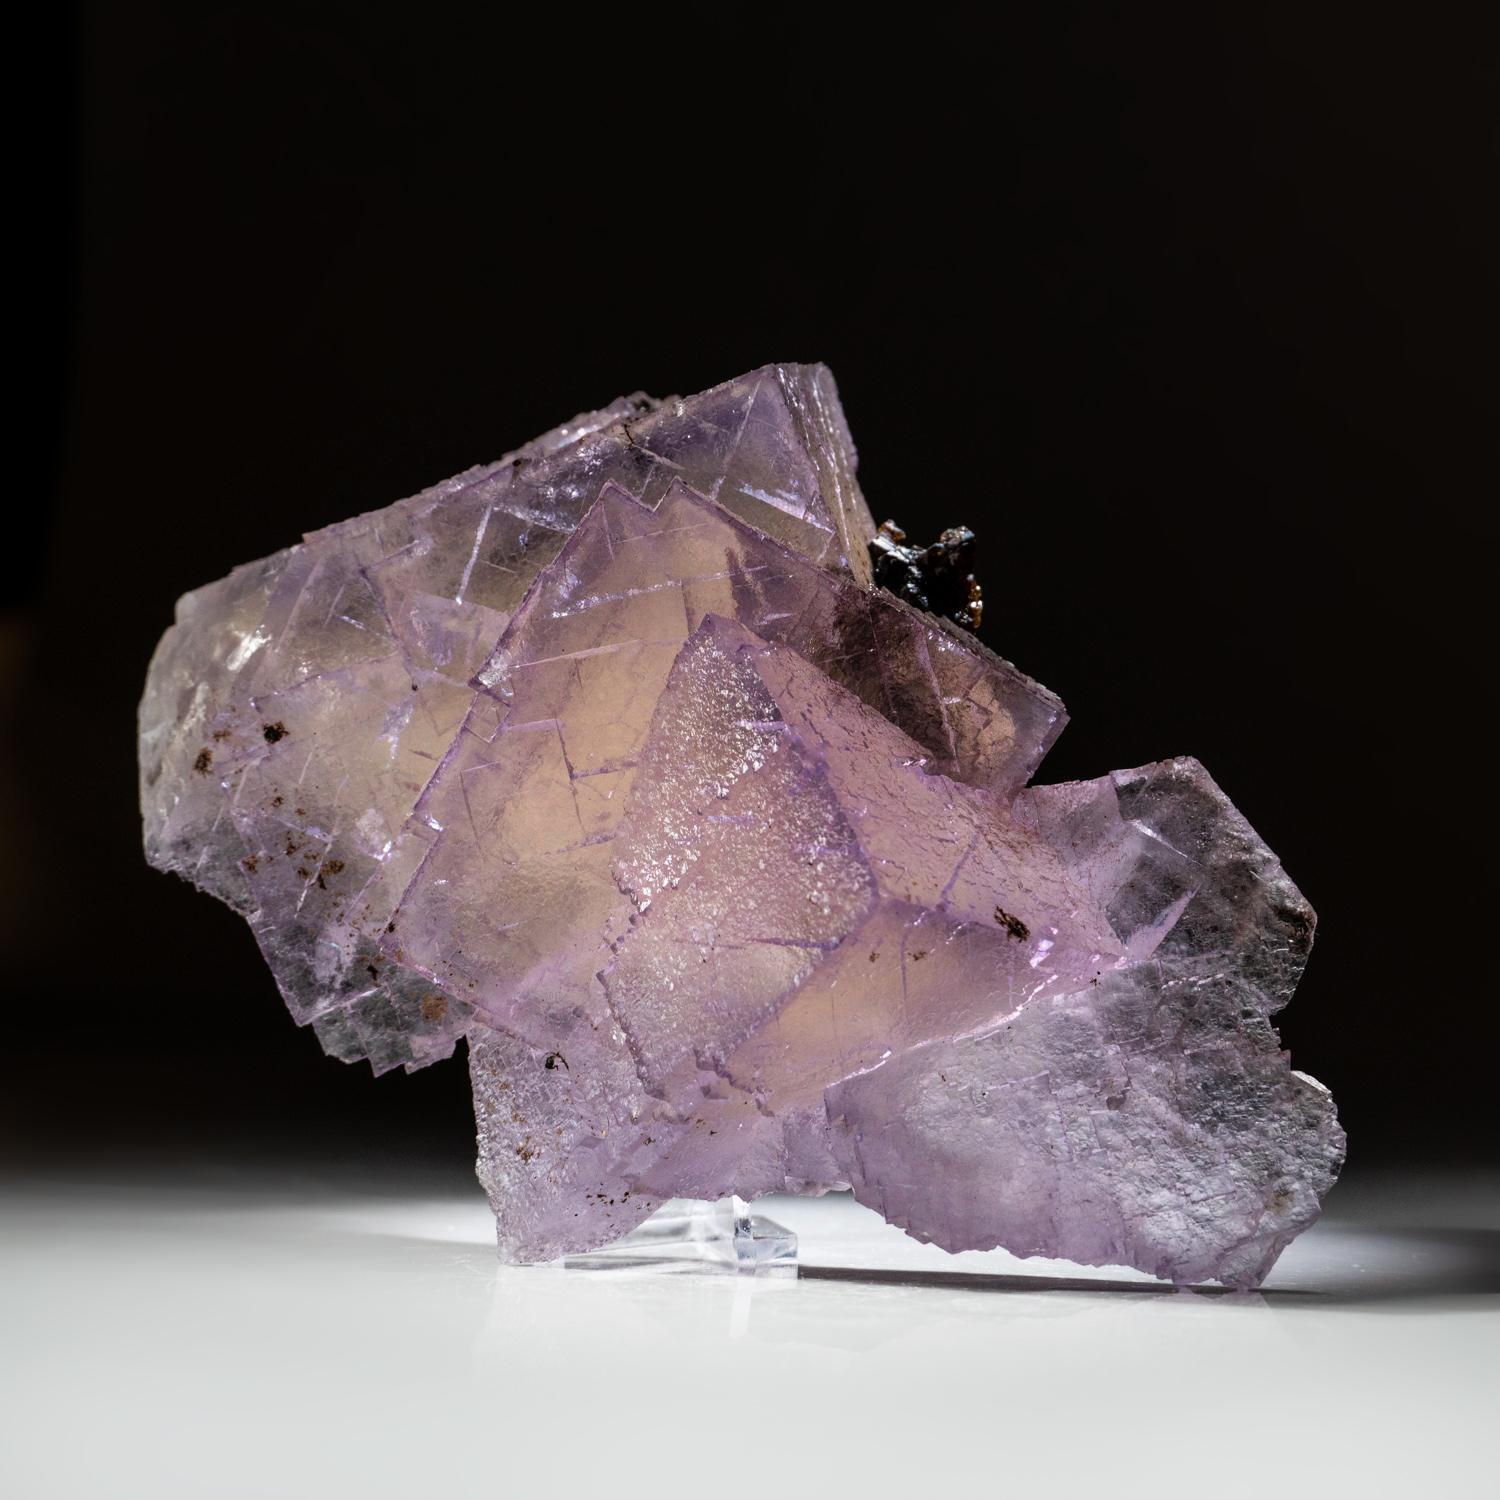 from Elmwood Mine, Carthage, Smith County, Tennessee Lustrous cubo-octahedral transparent purple fluorite crystals in a complex intersecting formation with faint yellow core. The fluorite crystals have glassy cubic faces with stepped growth